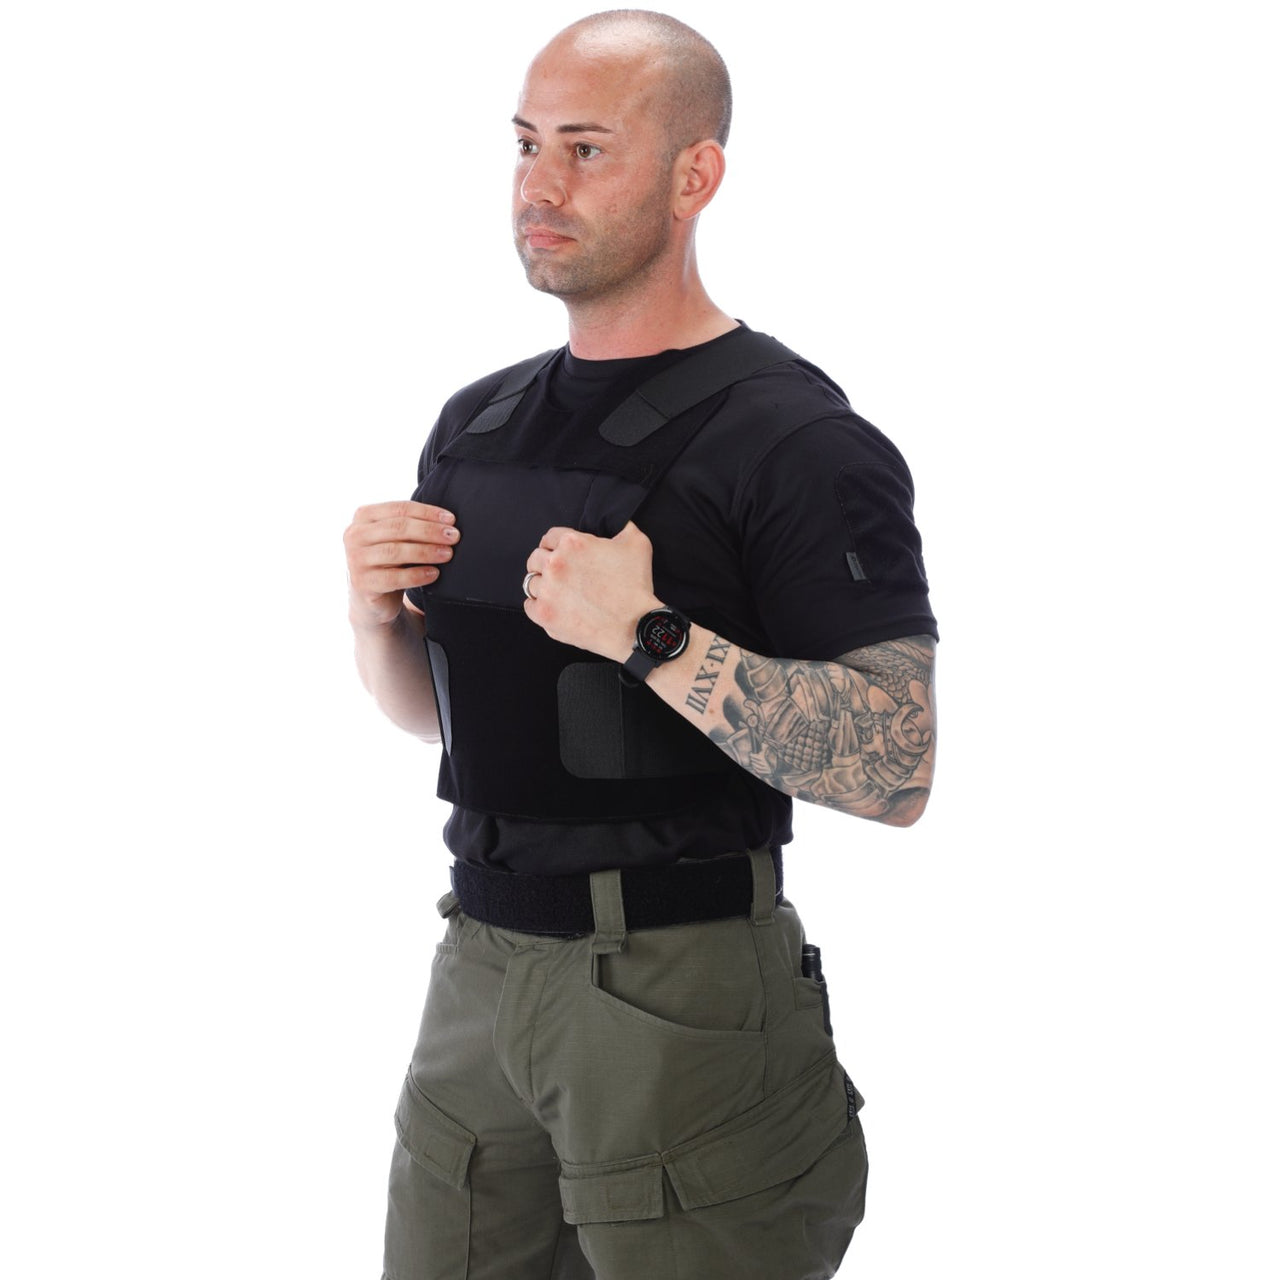 A man in a green shirt and black pants is posing in front of a white background wearing the Body Armor Direct All American Concealable Enhanced Multi-Threat Vest by Body Armor Direct.